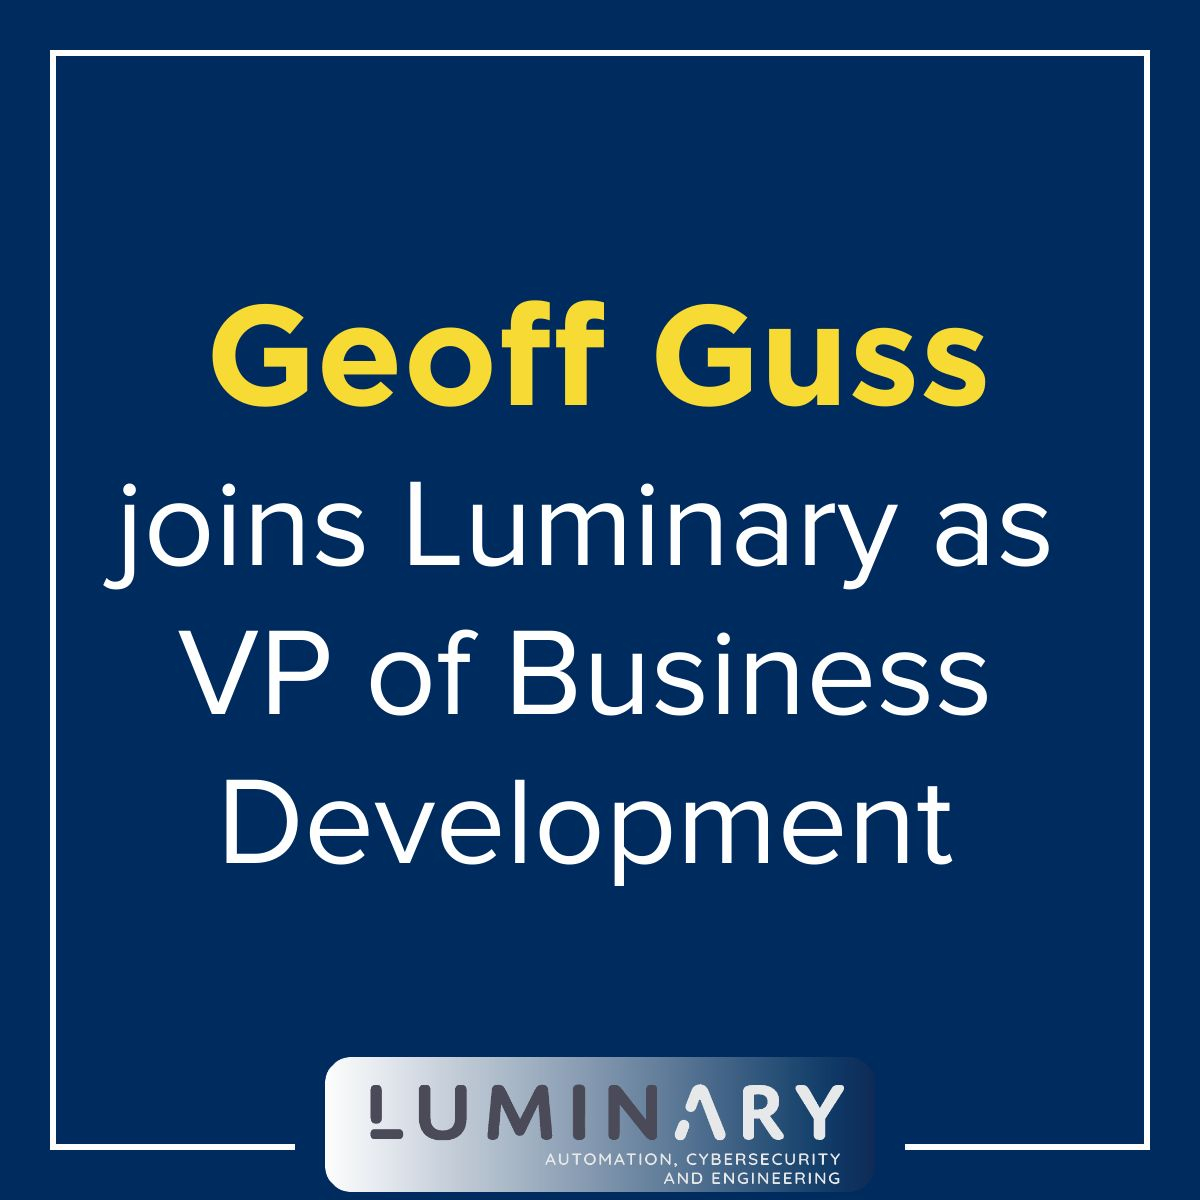 Luminary Hires New Vice President of Business Development